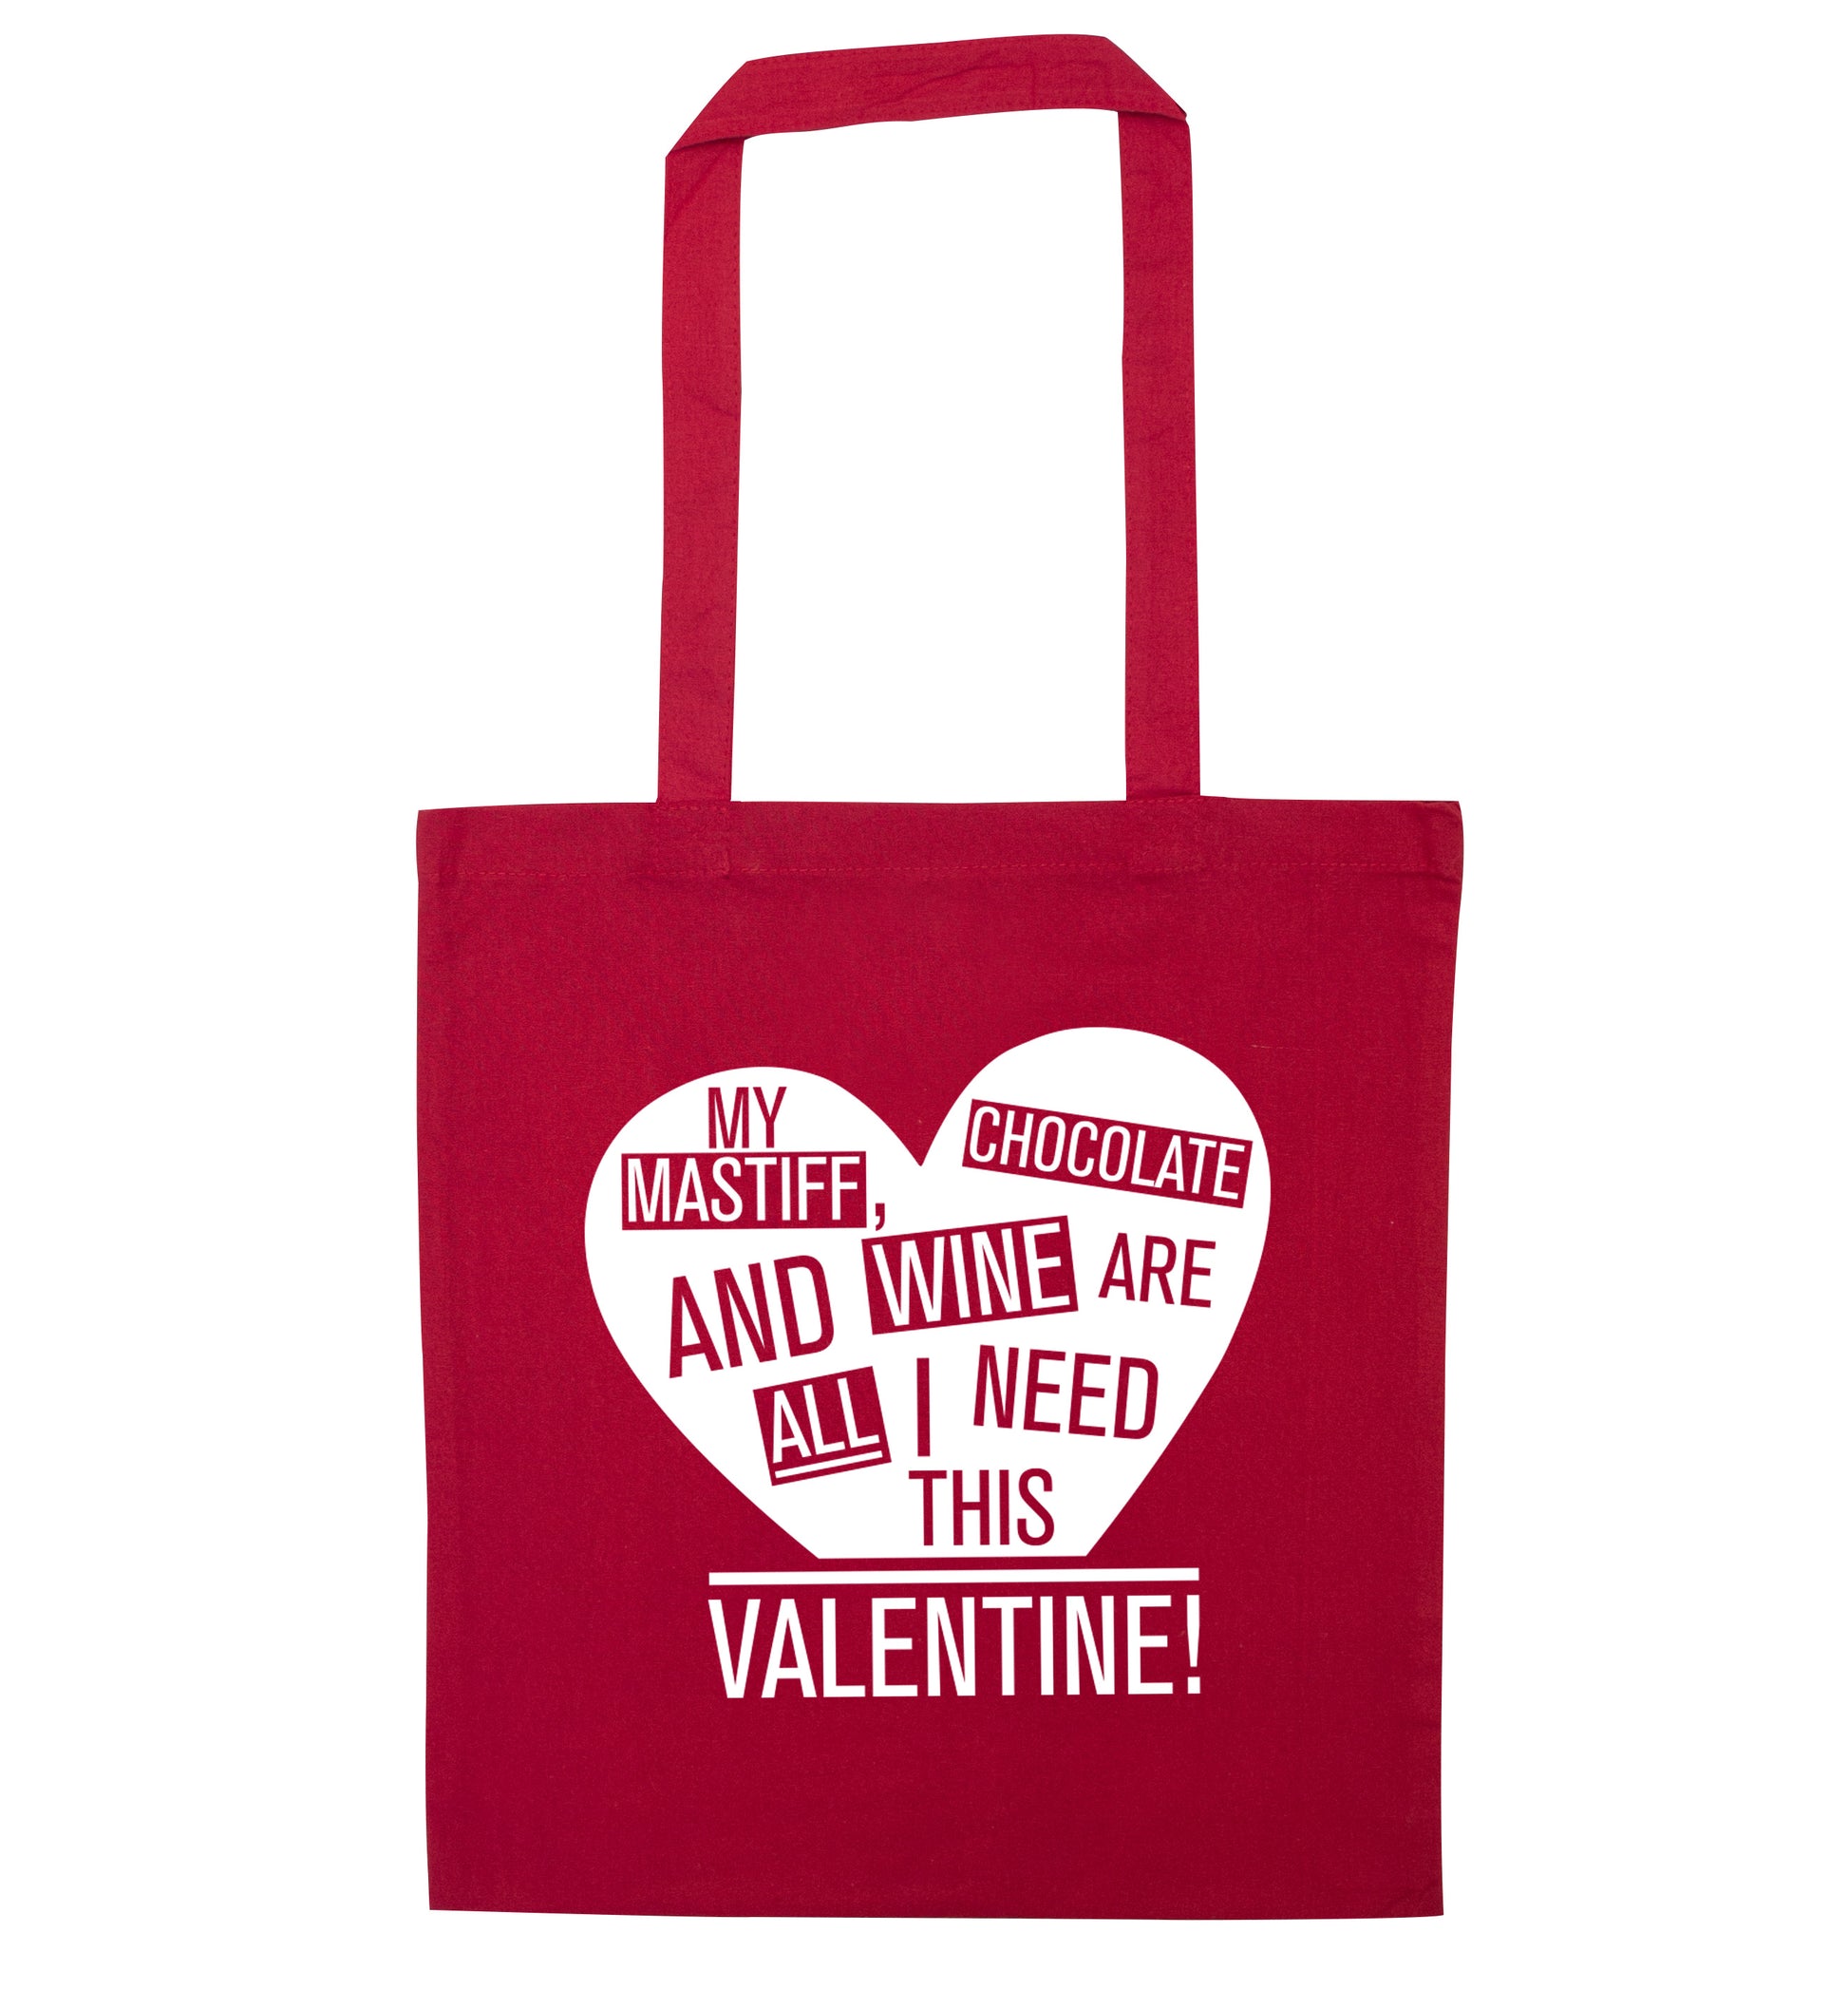 My mastiff, chocolate and wine are all I need this valentine! red tote bag